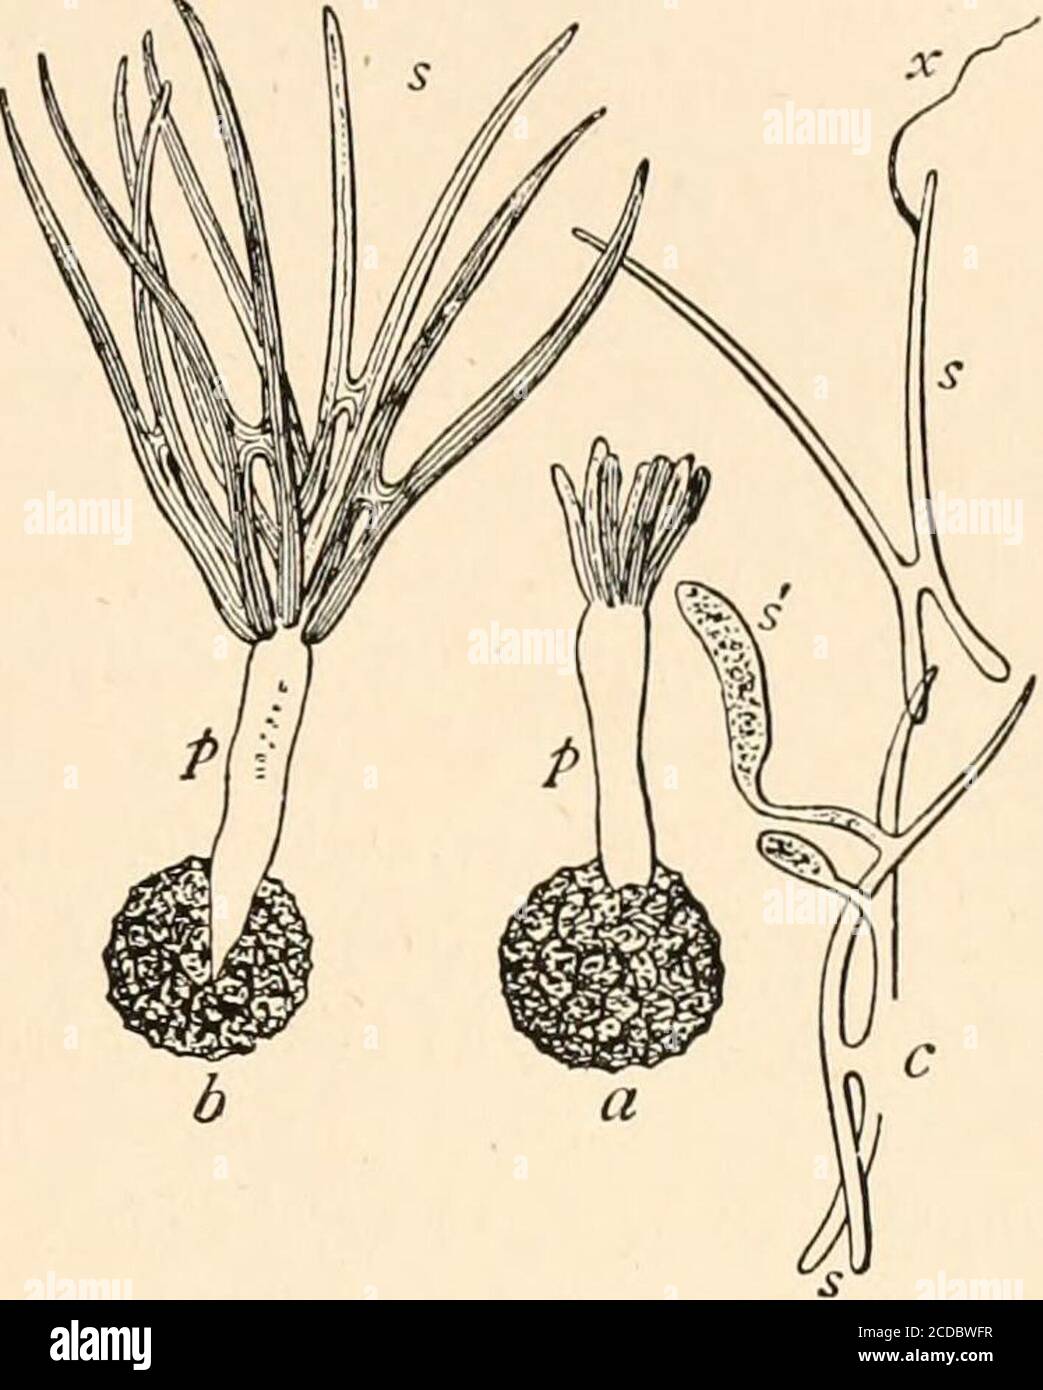 . Introduction to the study of fungi, their organography, classification, and distribution for the use of collectors . o multiply themselves manytimes by budding, after the manner of yeast-spores, which isthe term applied to them by Brefeld, but liable to misinter-pretation. In order the better to comprehend the process, itmay be detailed as observed in Tilletia (Fig. 120). This parasiteproduces its teleutospores within the grains of wheat, and isknown to farmers as bunt.The appearance of the grainsexternally is very littlechanged, but slightly darkenedin colour, and when crushedare seen to be Stock Photo